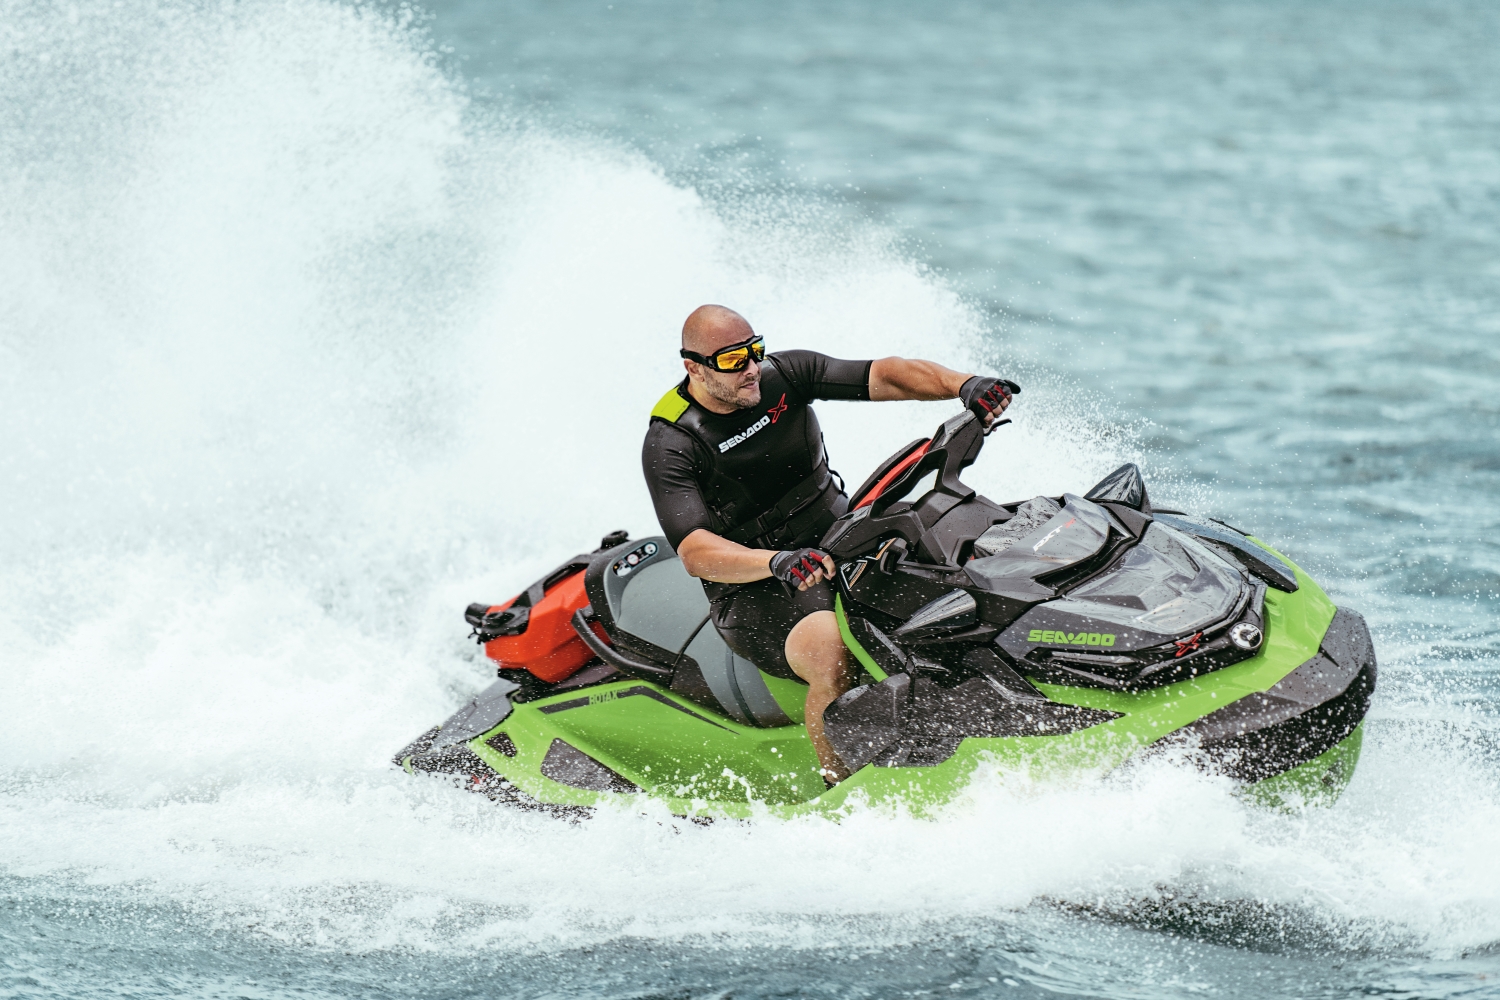 OUR MUST-HAVE ACCESSORIES FOR ANY SEA-DOO OWNER